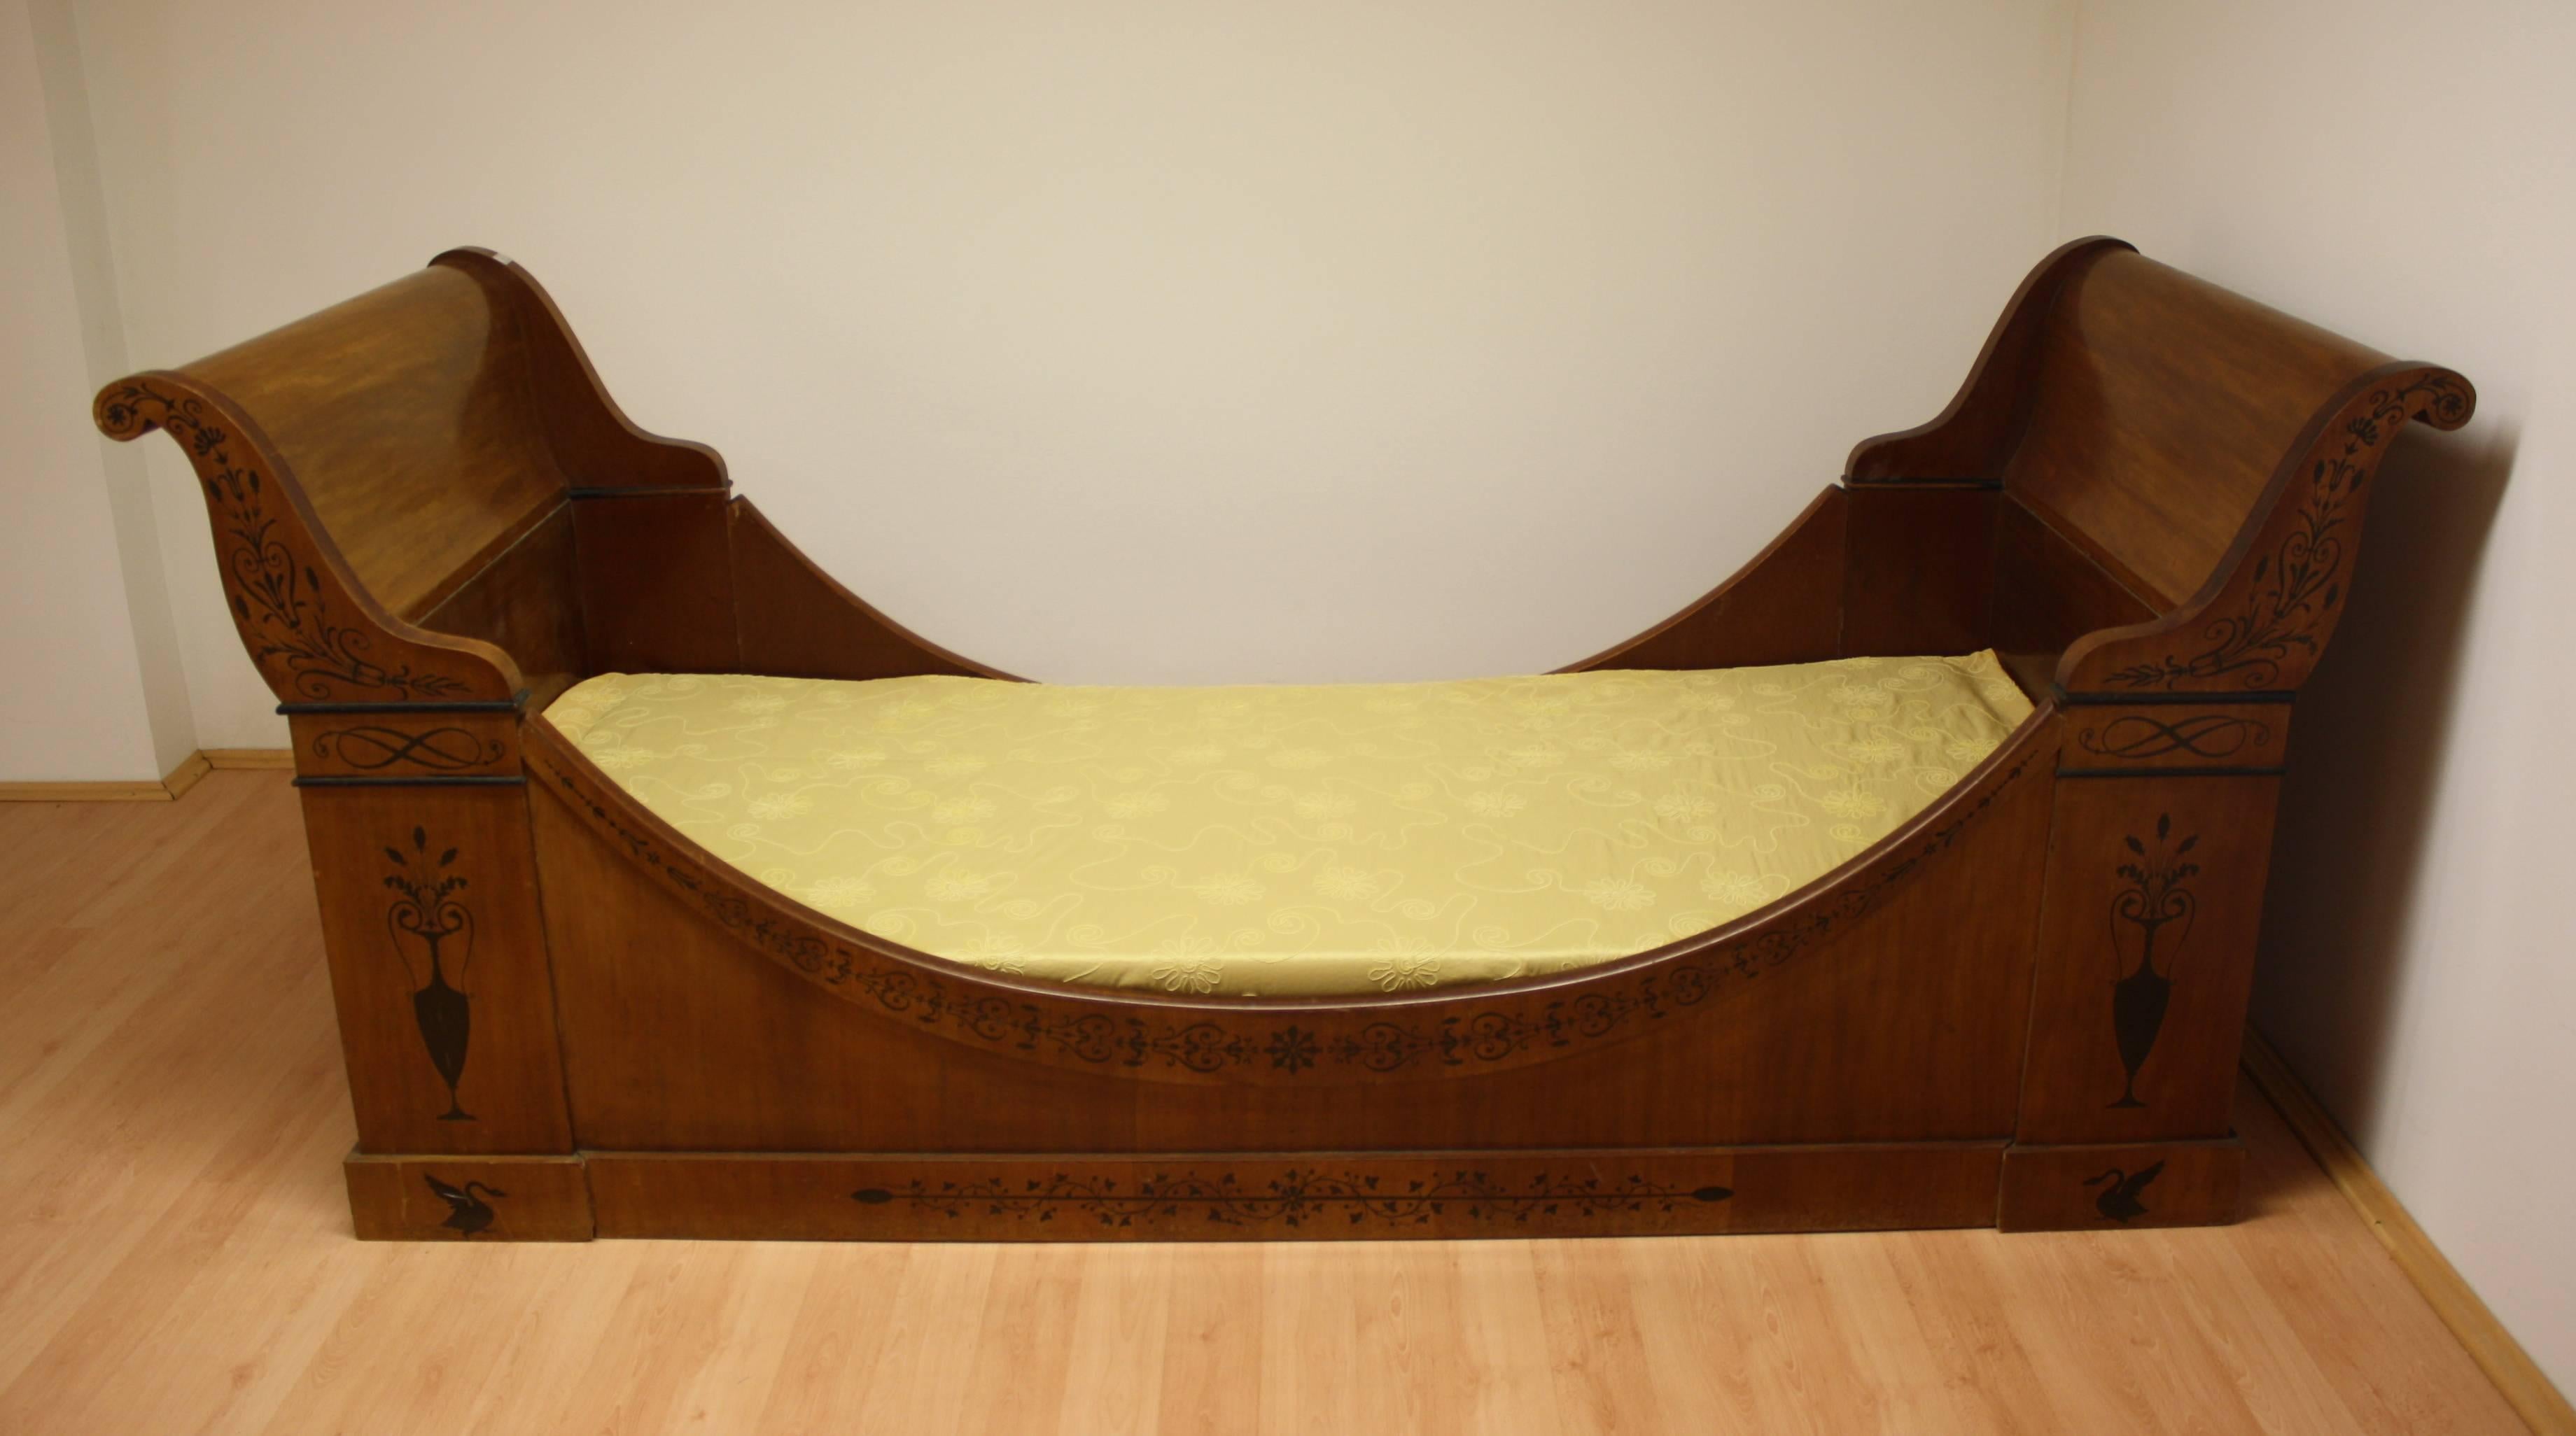 Classicism daybed, with decorative brand painting. 
This piece will require a custom slatted frame and mattress, it comes apart without inner life. It belongs if you use it as daybed, guest bed or everyday sleeper.
Inside: L 202cm, D 90cm.
 